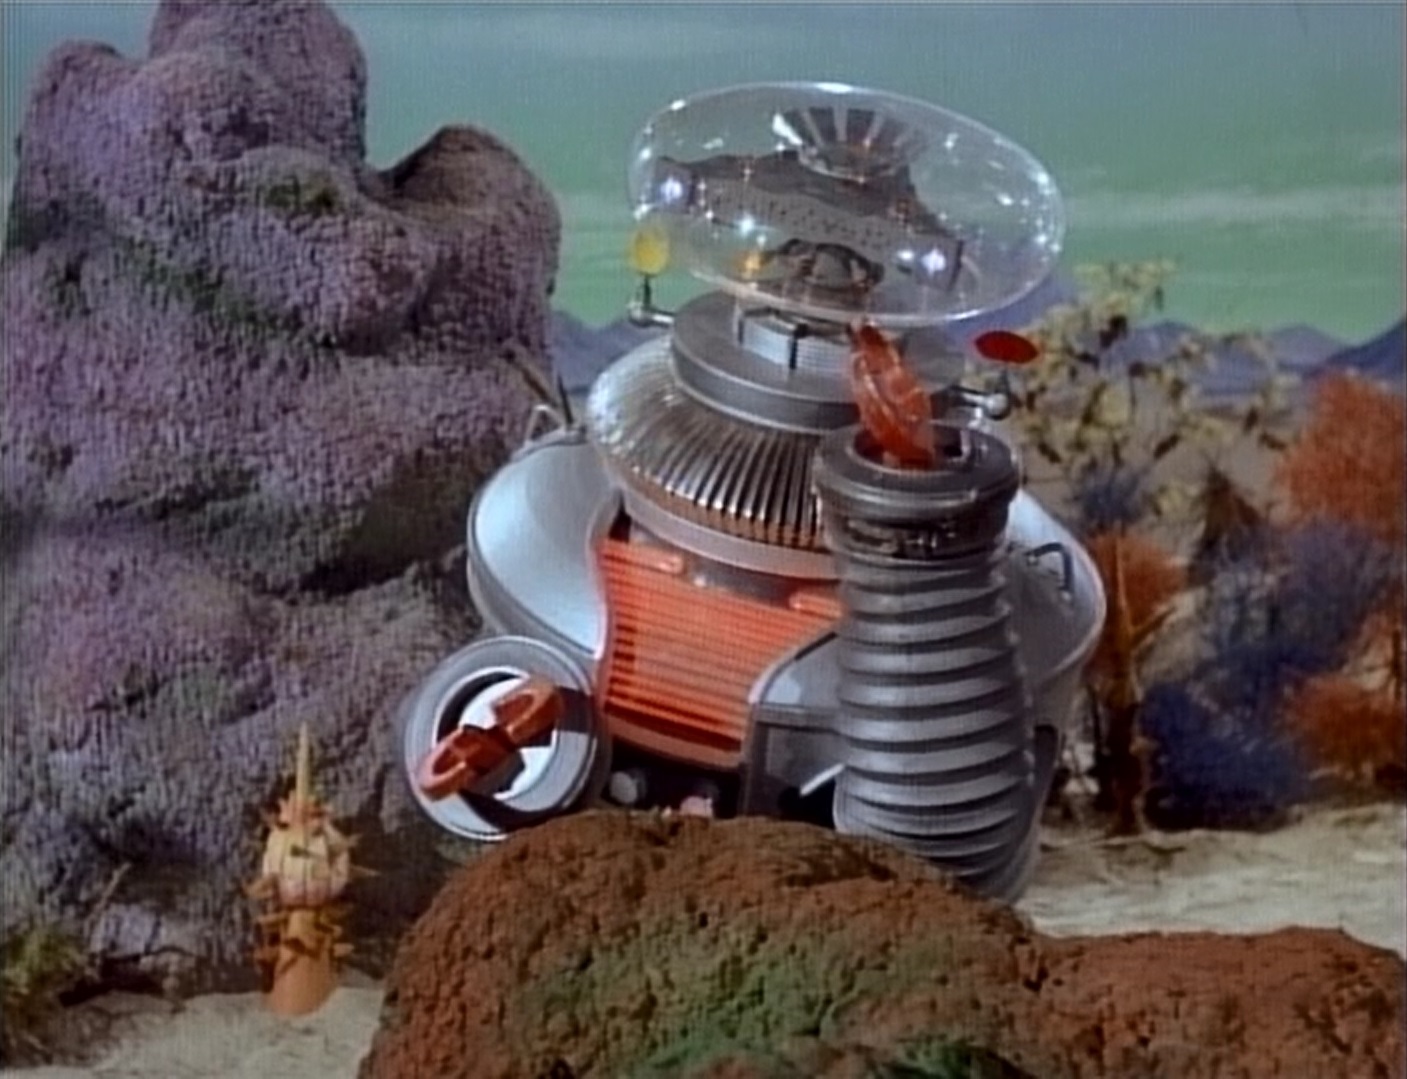 Lost-in-Space-Wreck-of-the-Robot-3.jpg